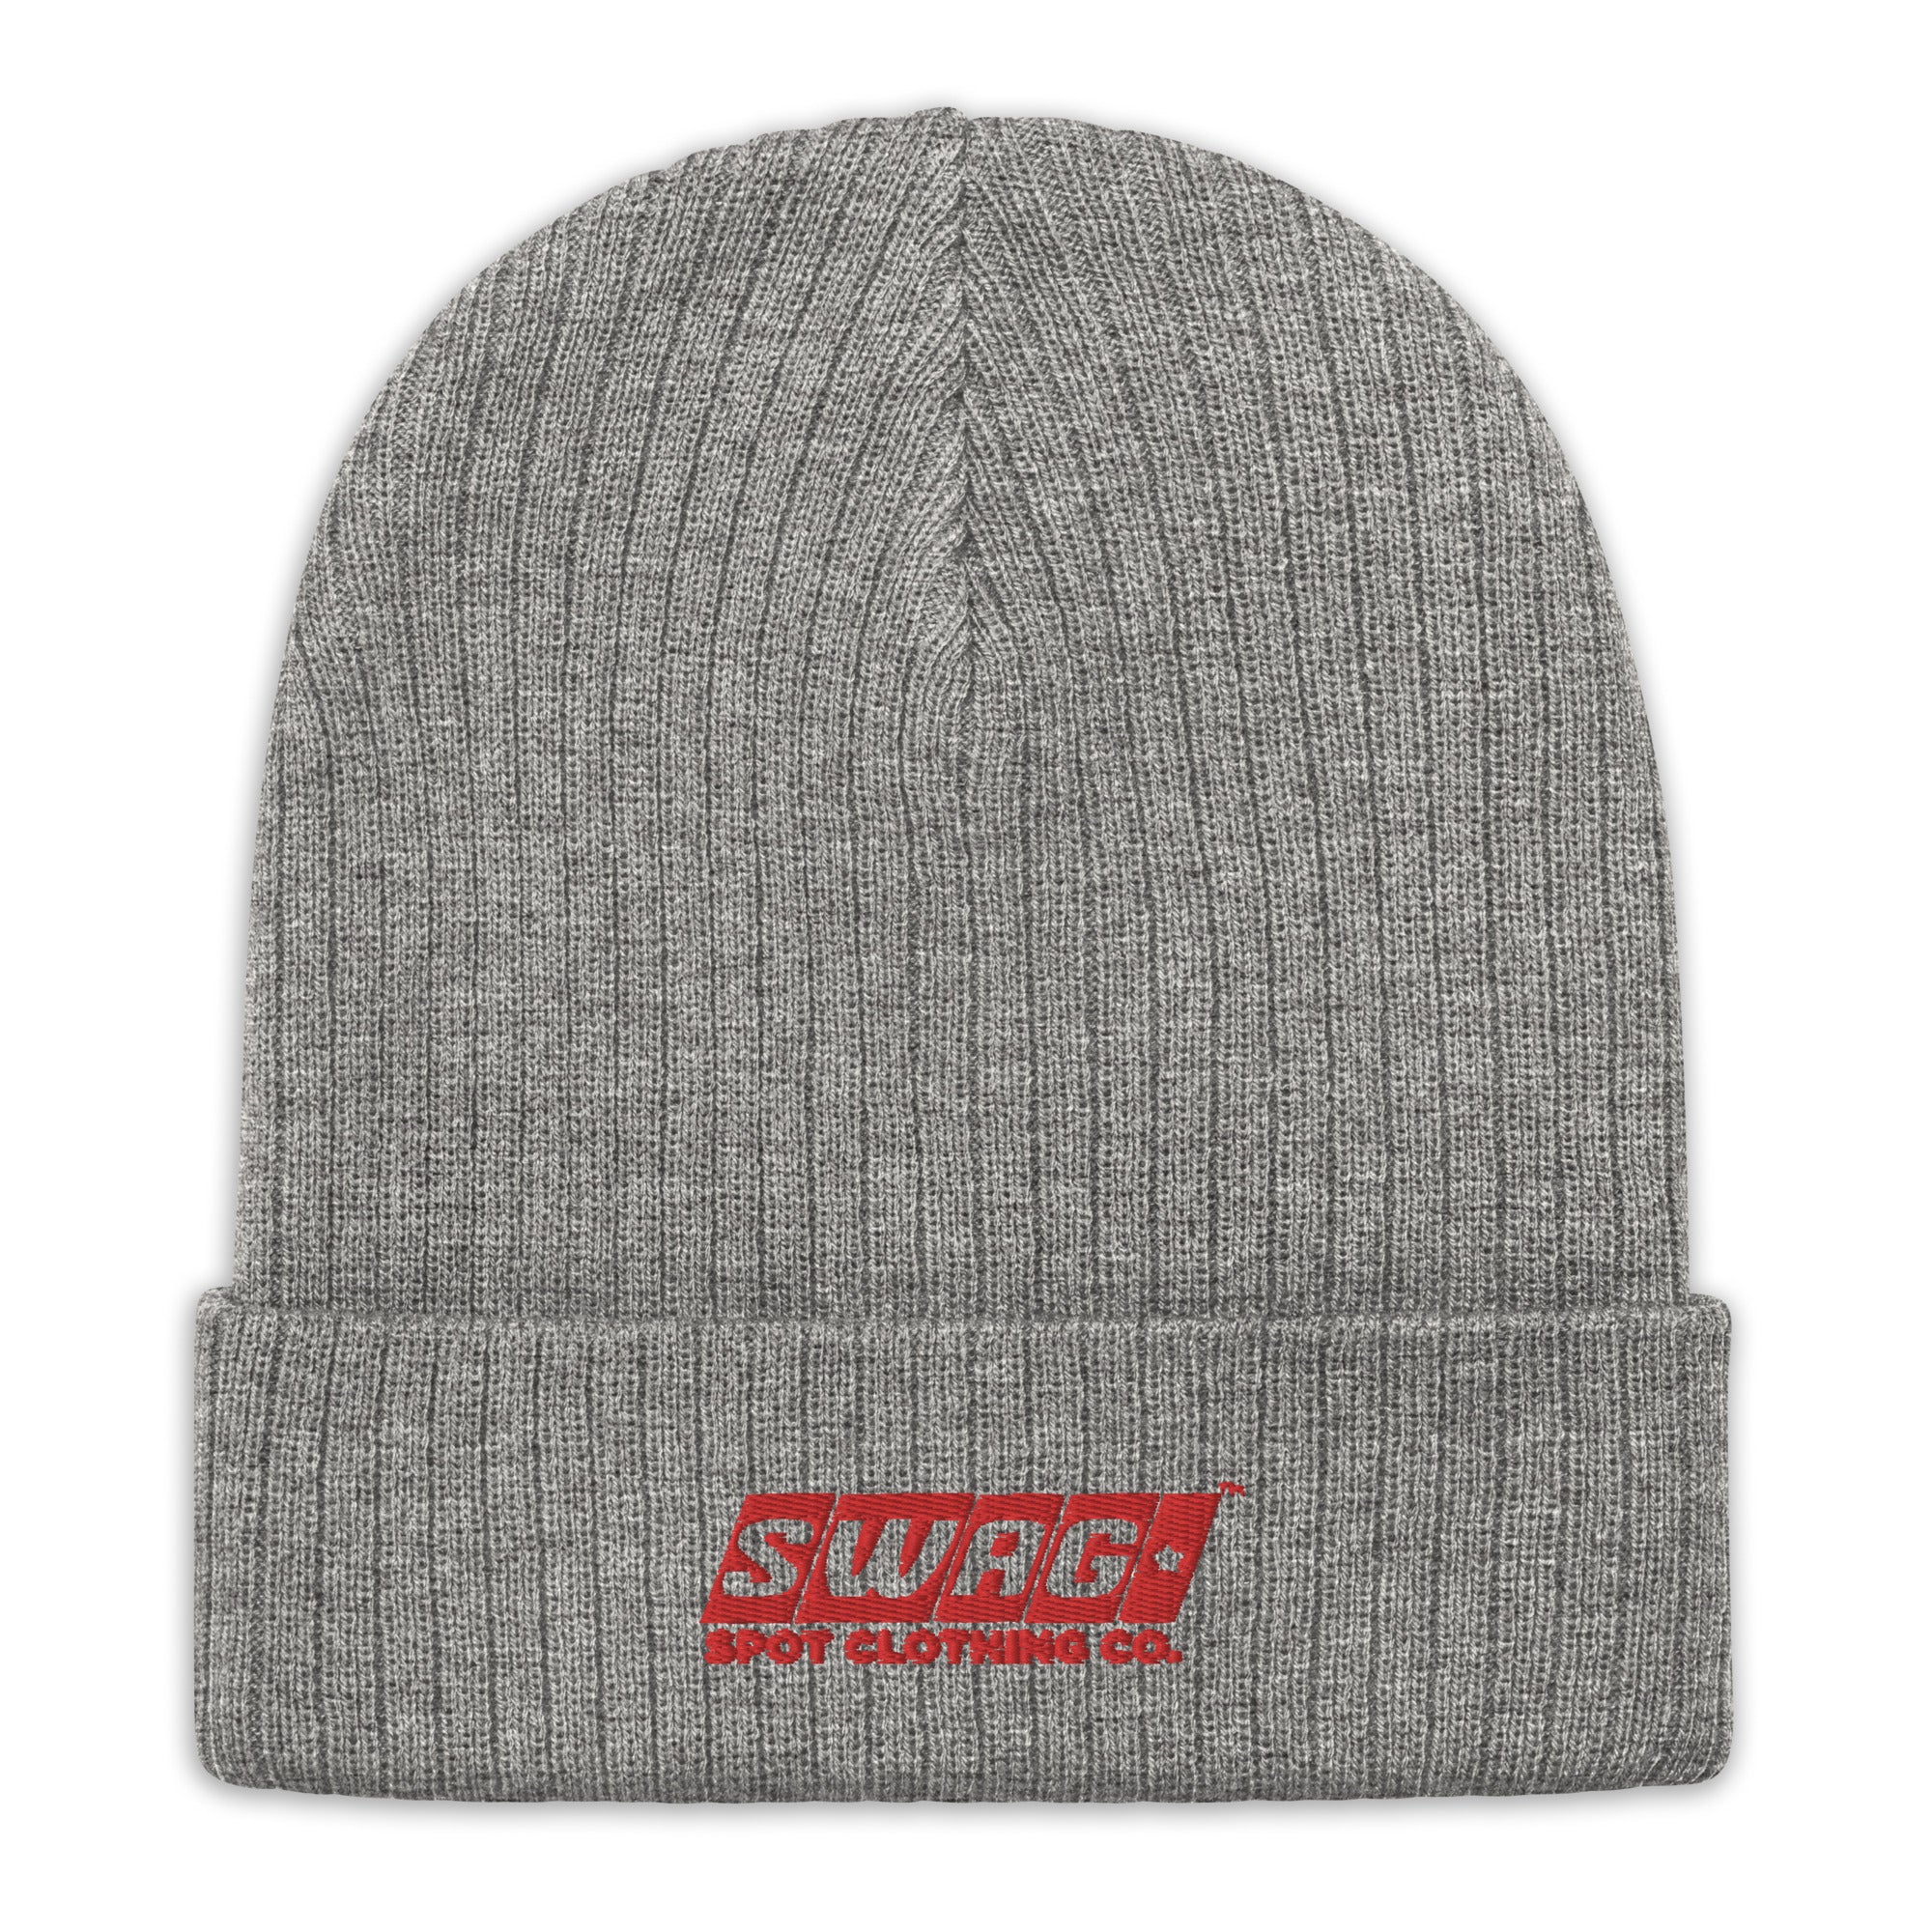 Swag Spot Clothing Co Classic Logo Ribbed knit beanie